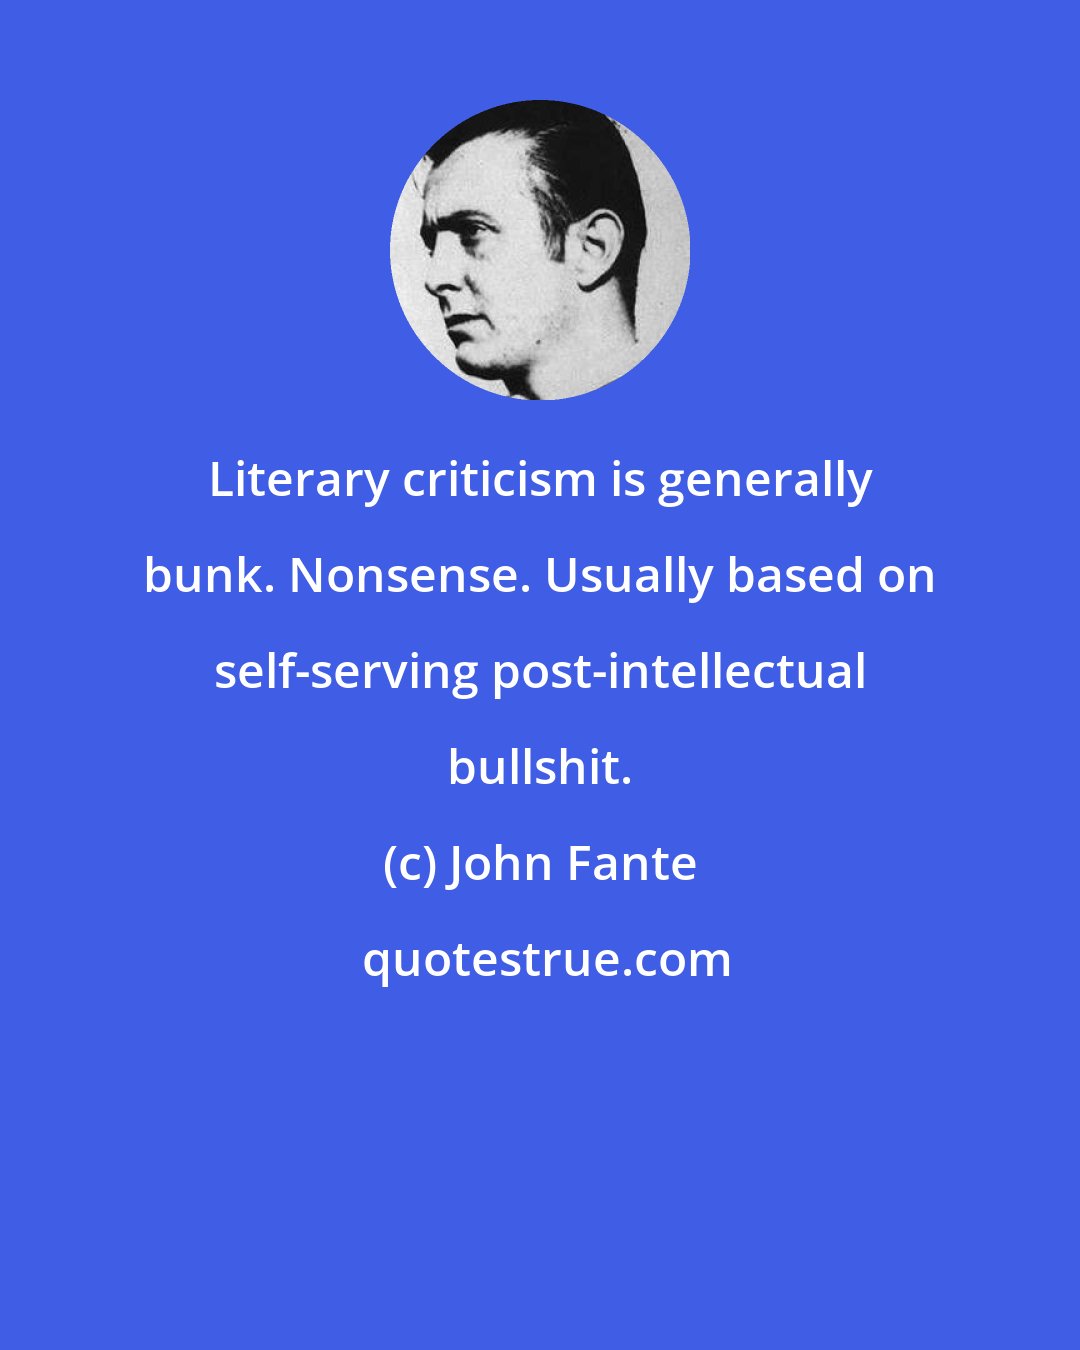 John Fante: Literary criticism is generally bunk. Nonsense. Usually based on self-serving post-intellectual bullshit.